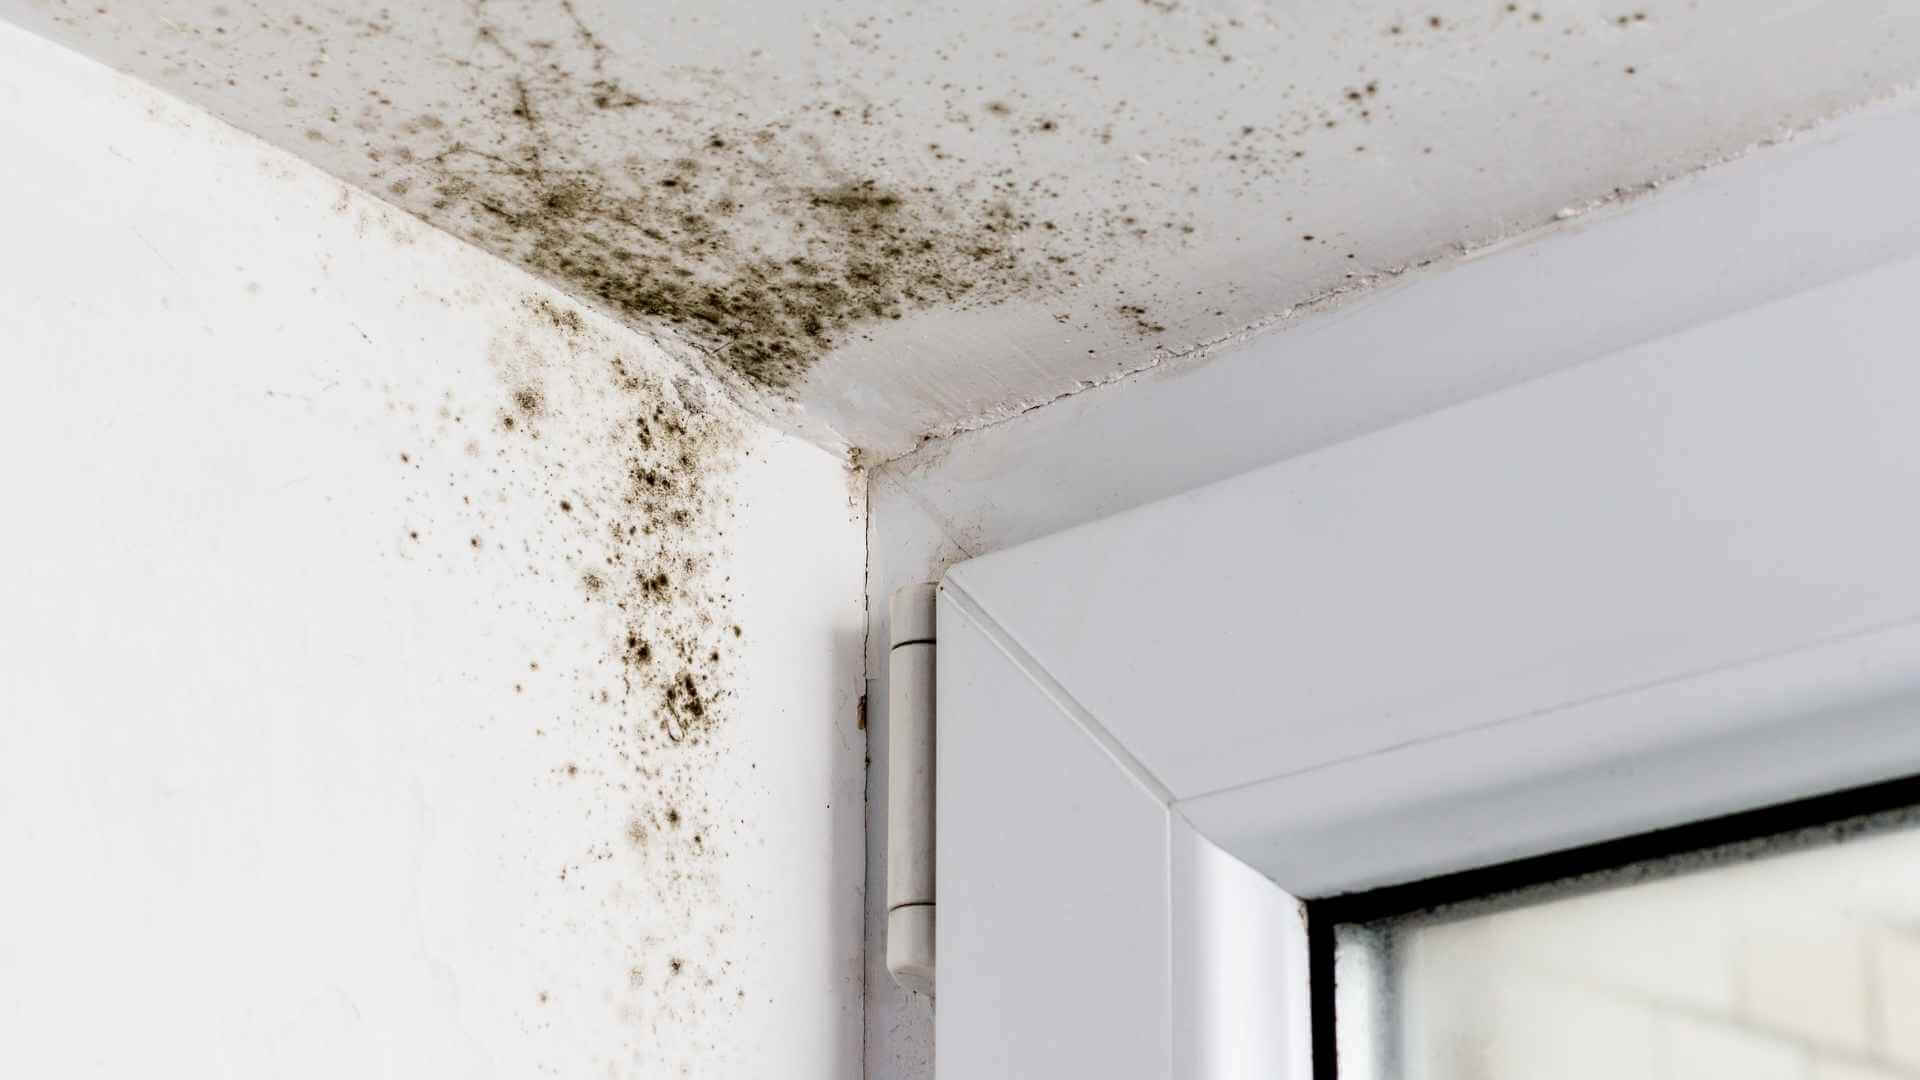 mold growth on the ceilling